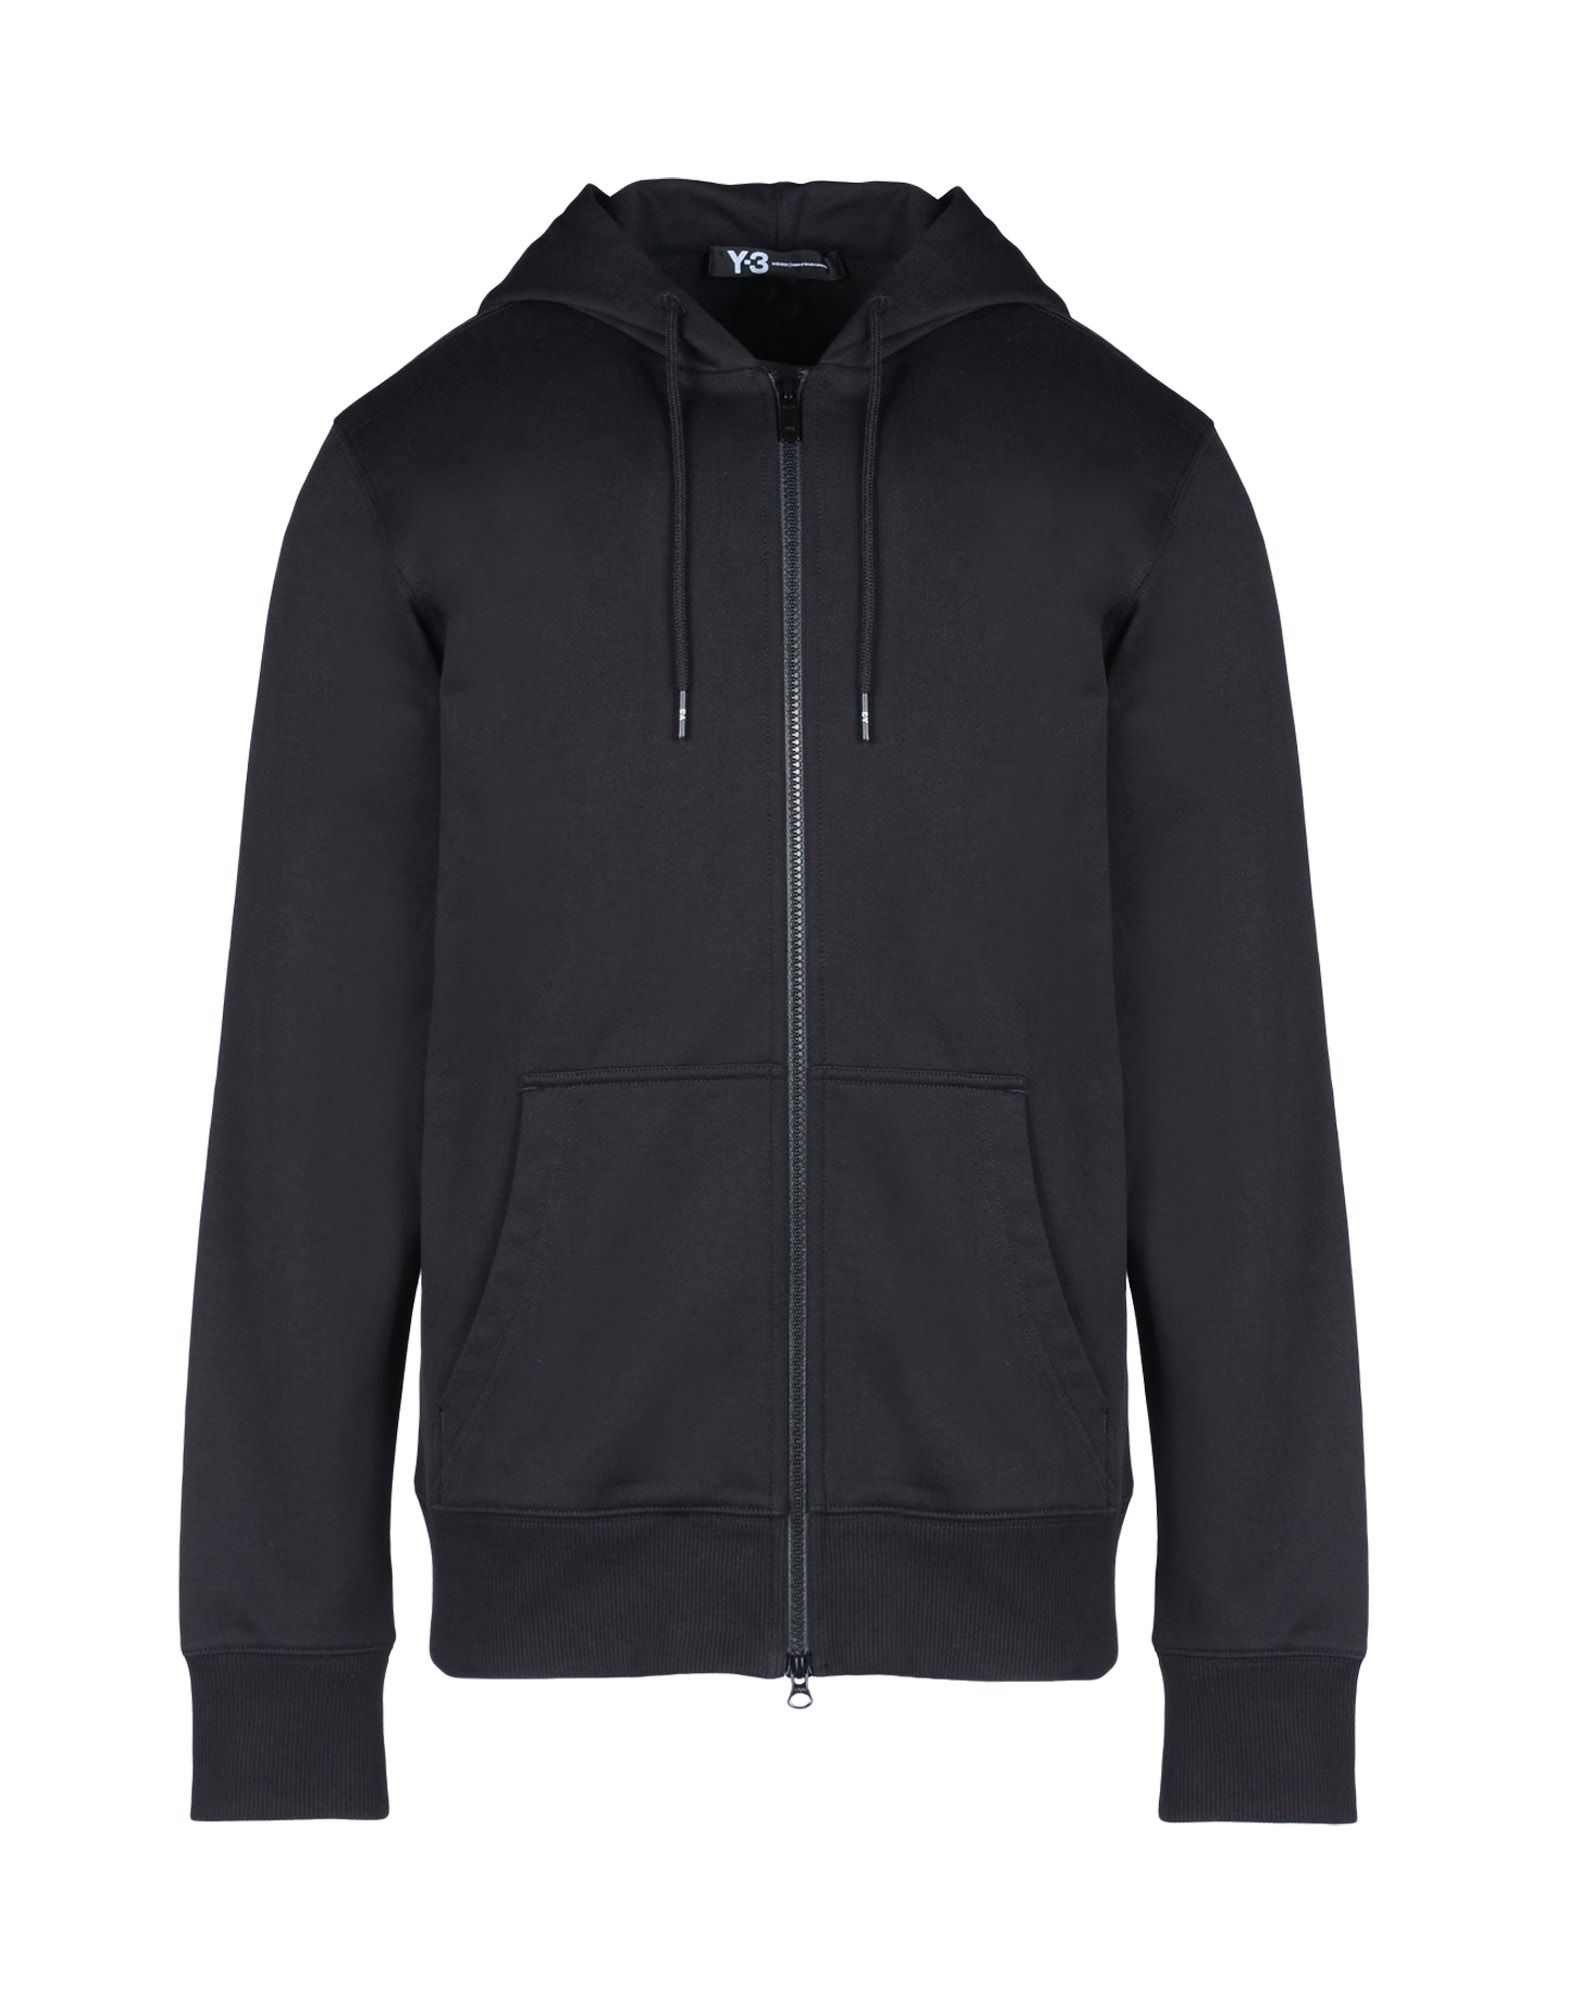 Y 3 Classic FT Hoodie for Men | Adidas Y-3 Official Store